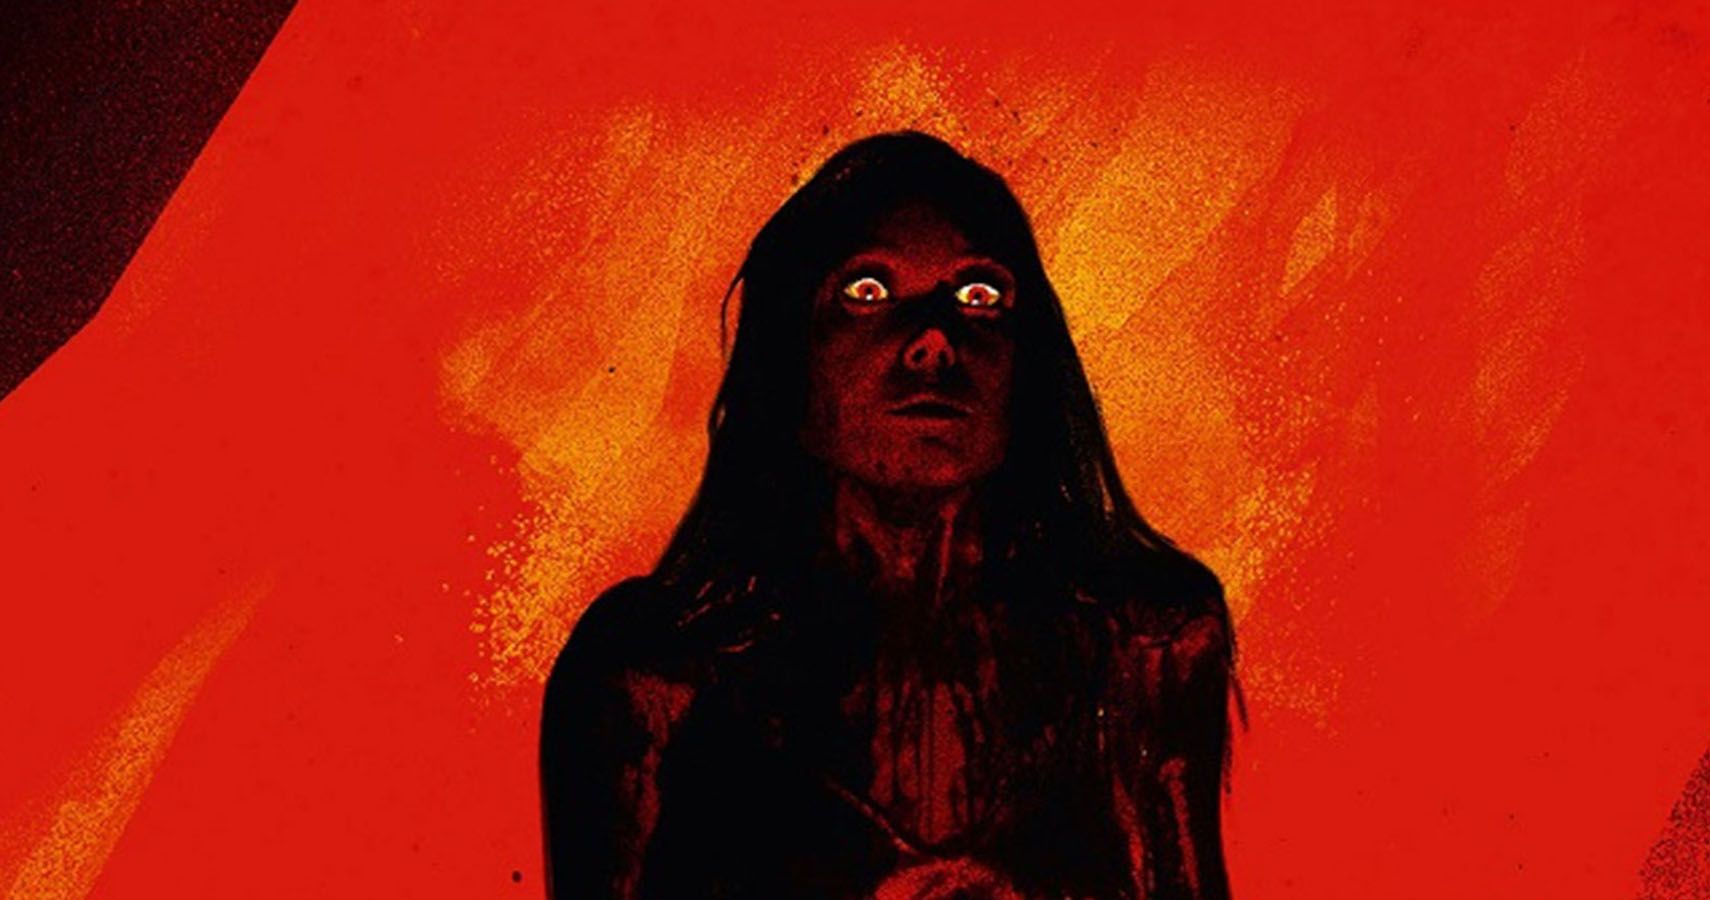 15 Best Horror Movies On Netflix According To IMDb RELATED 10 Old Horror Movies That Are Still Scary Today NEXT The 5 Scariest Zombie Films (And The 5 Funniest)